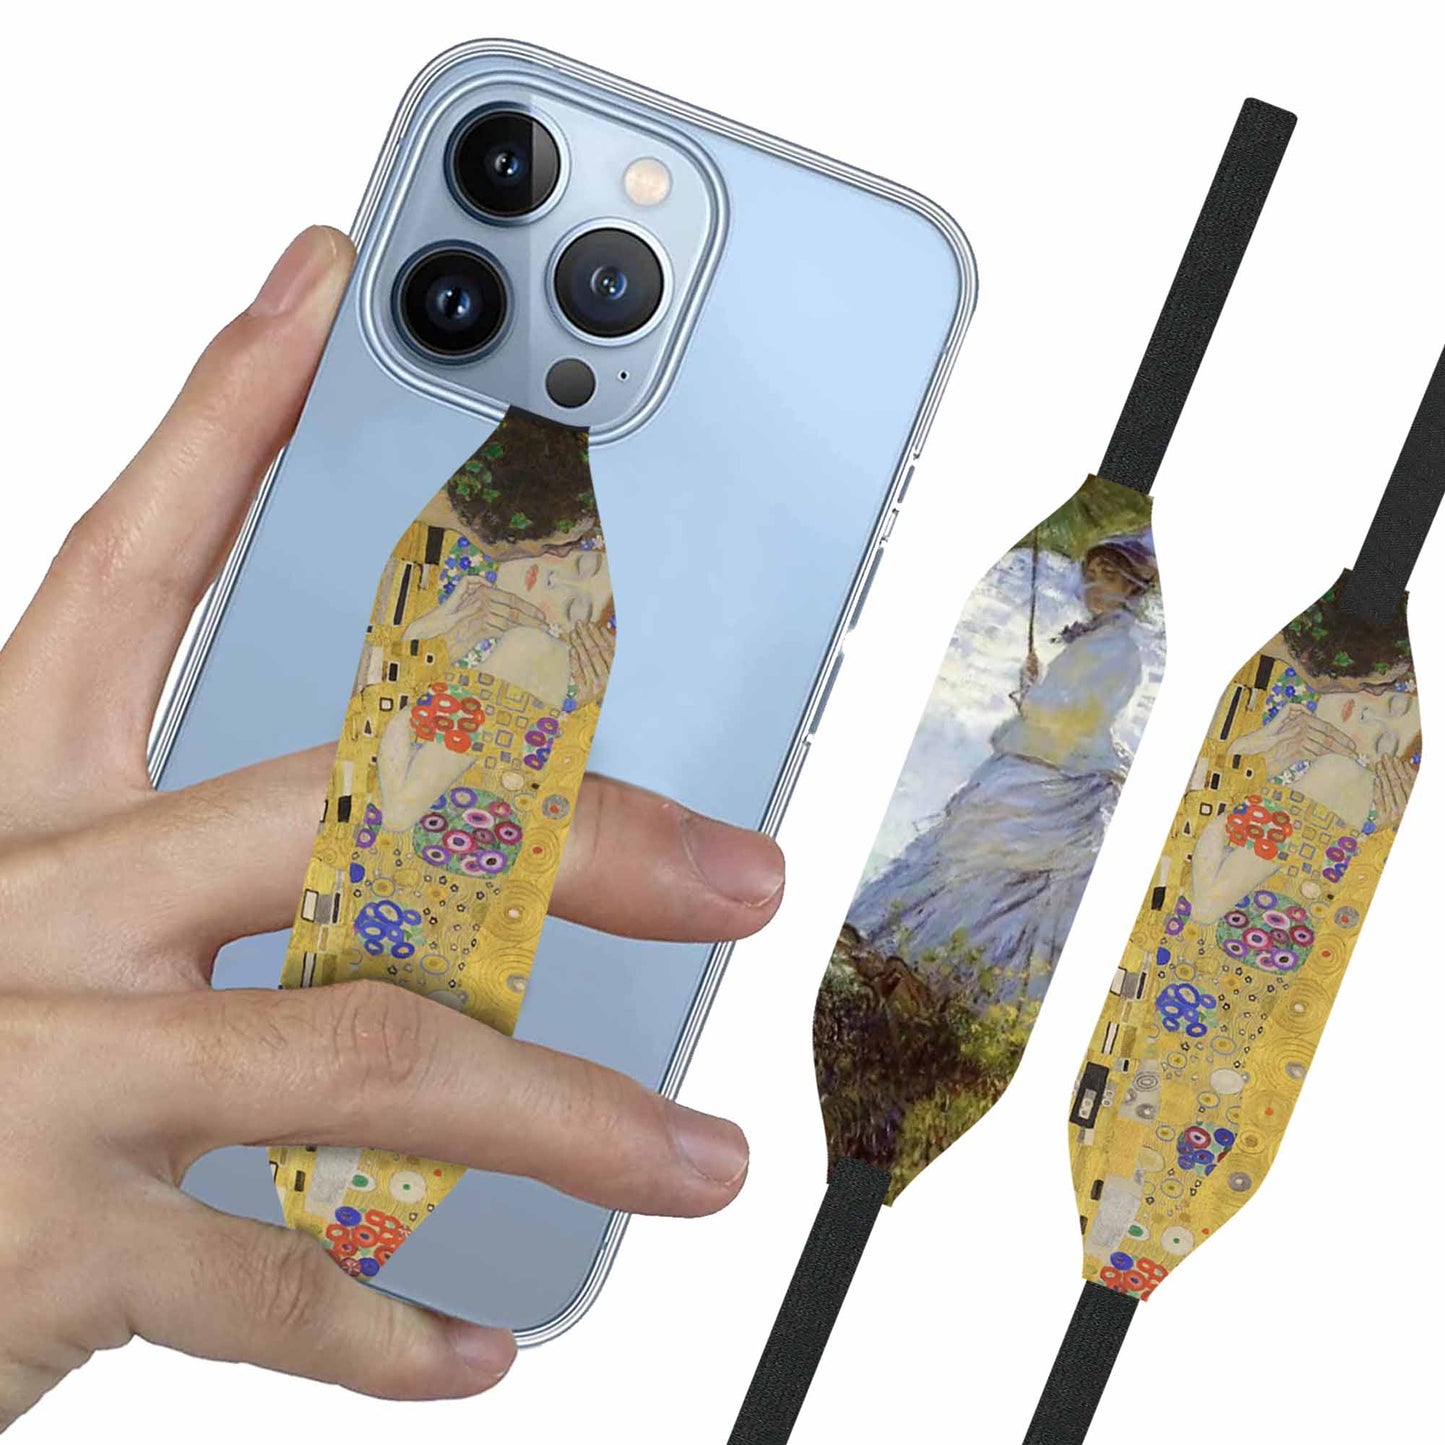 Switchbands Universal Stretchable Phone Hand Straps And Finger Loop For Phone Cases - Starry Night & Wheat fields with Crows